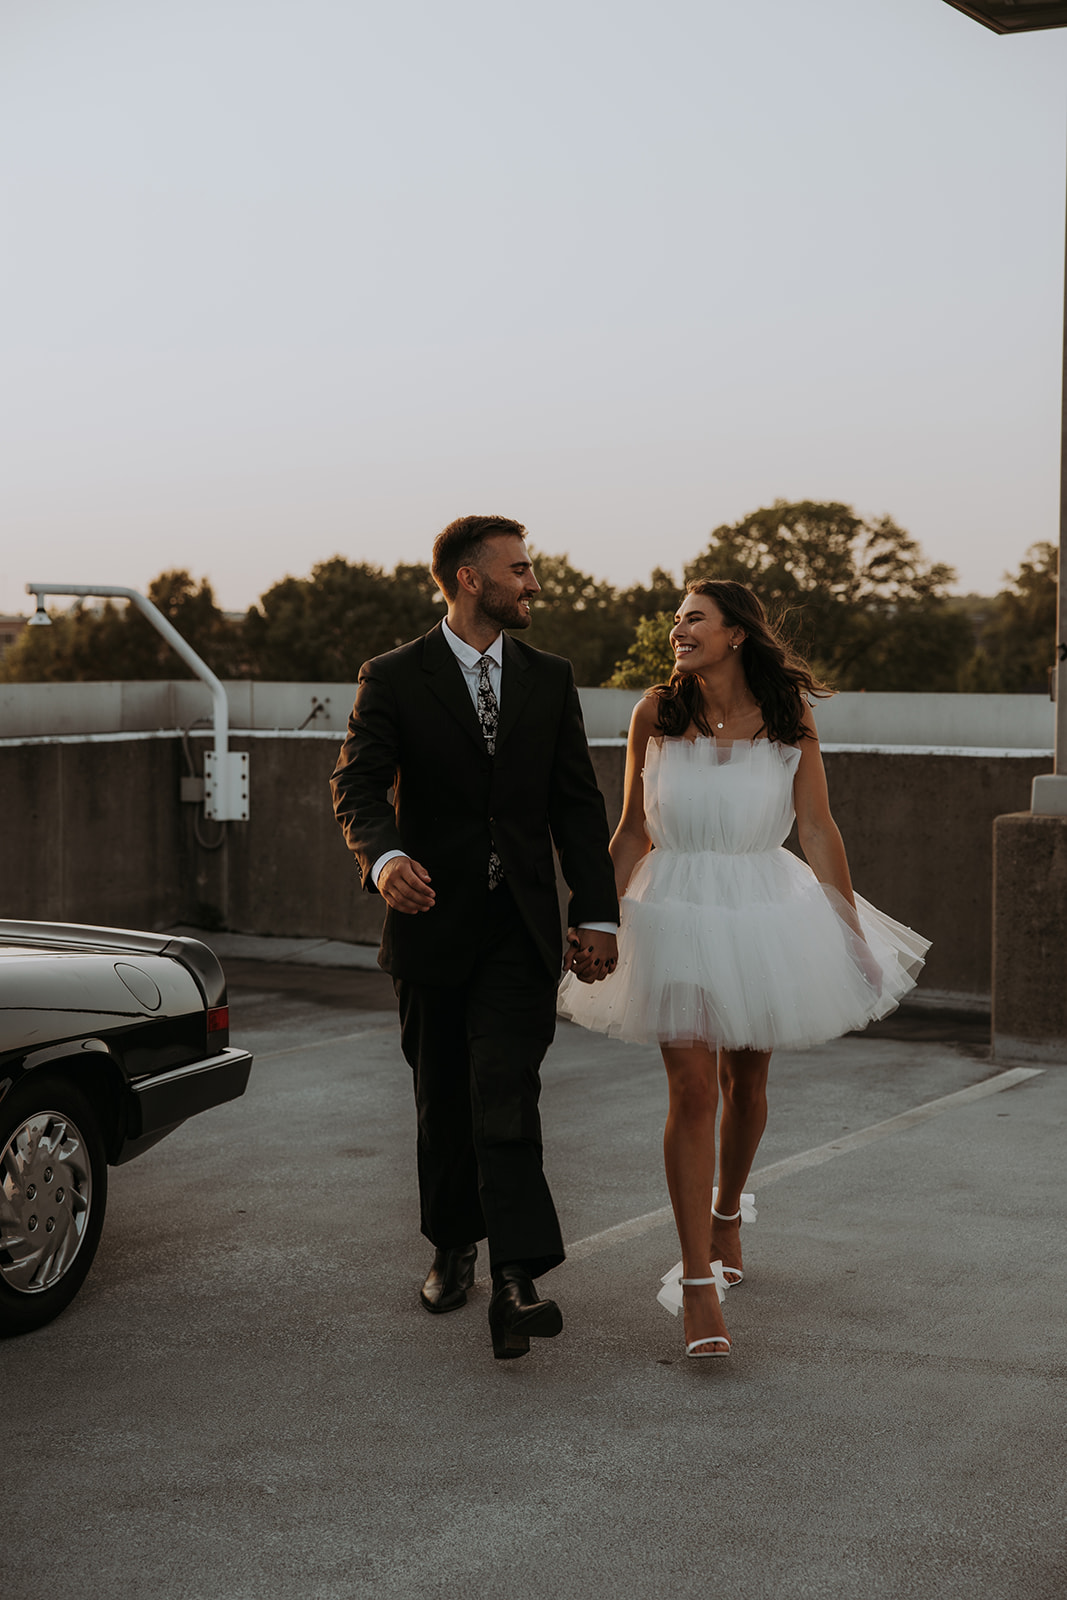 A parking garage rooftop engagement photo session